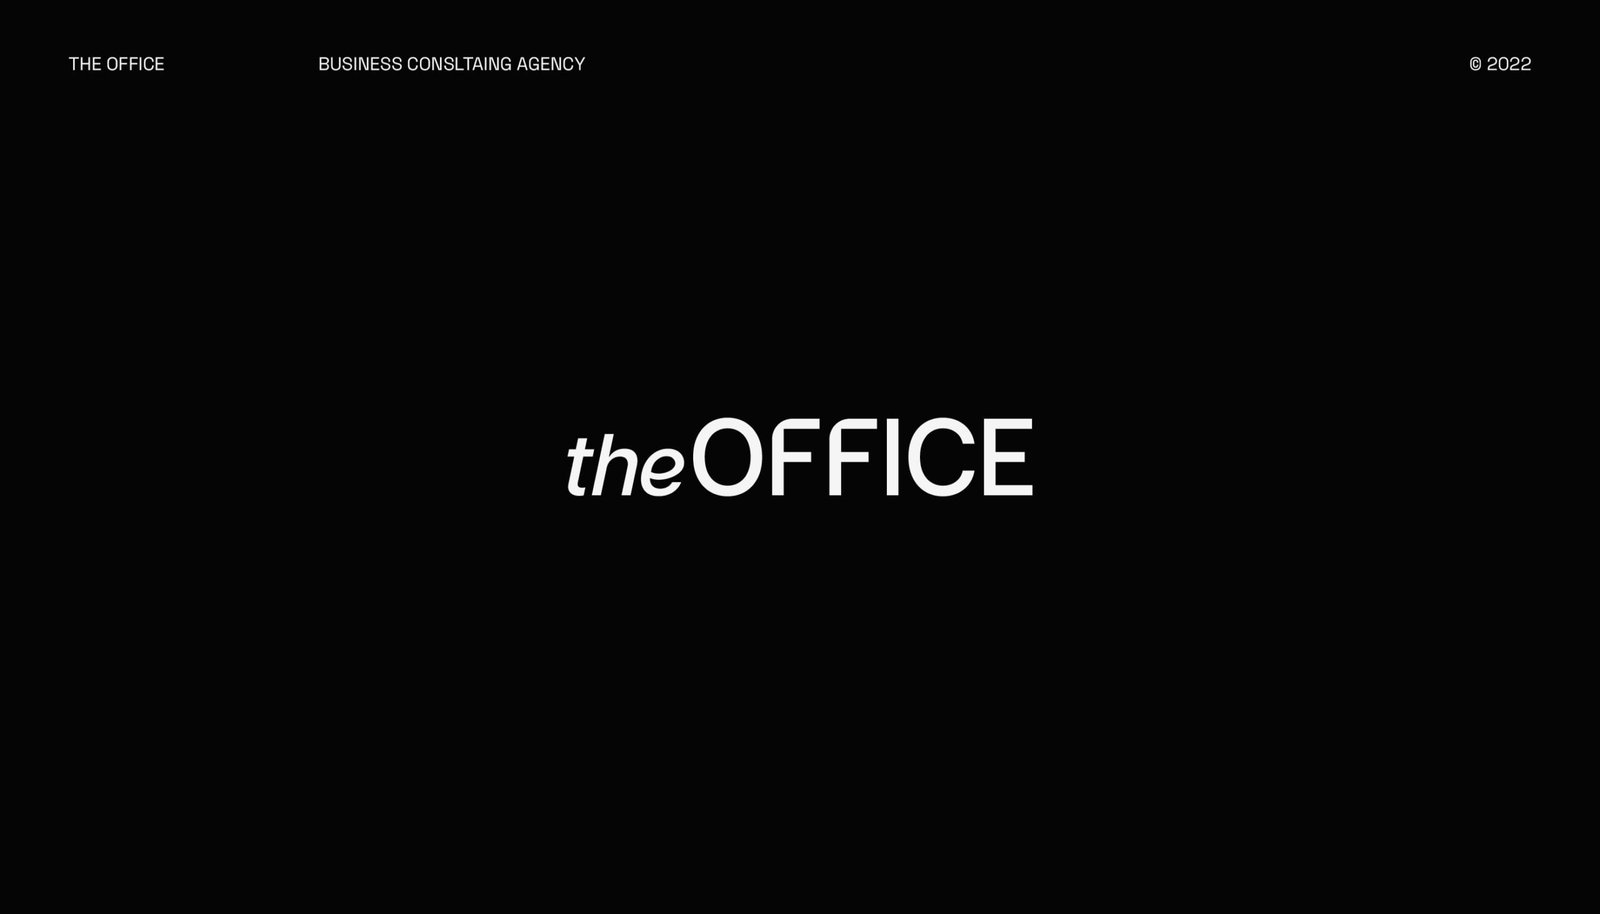 a wordmark design for "the Office"